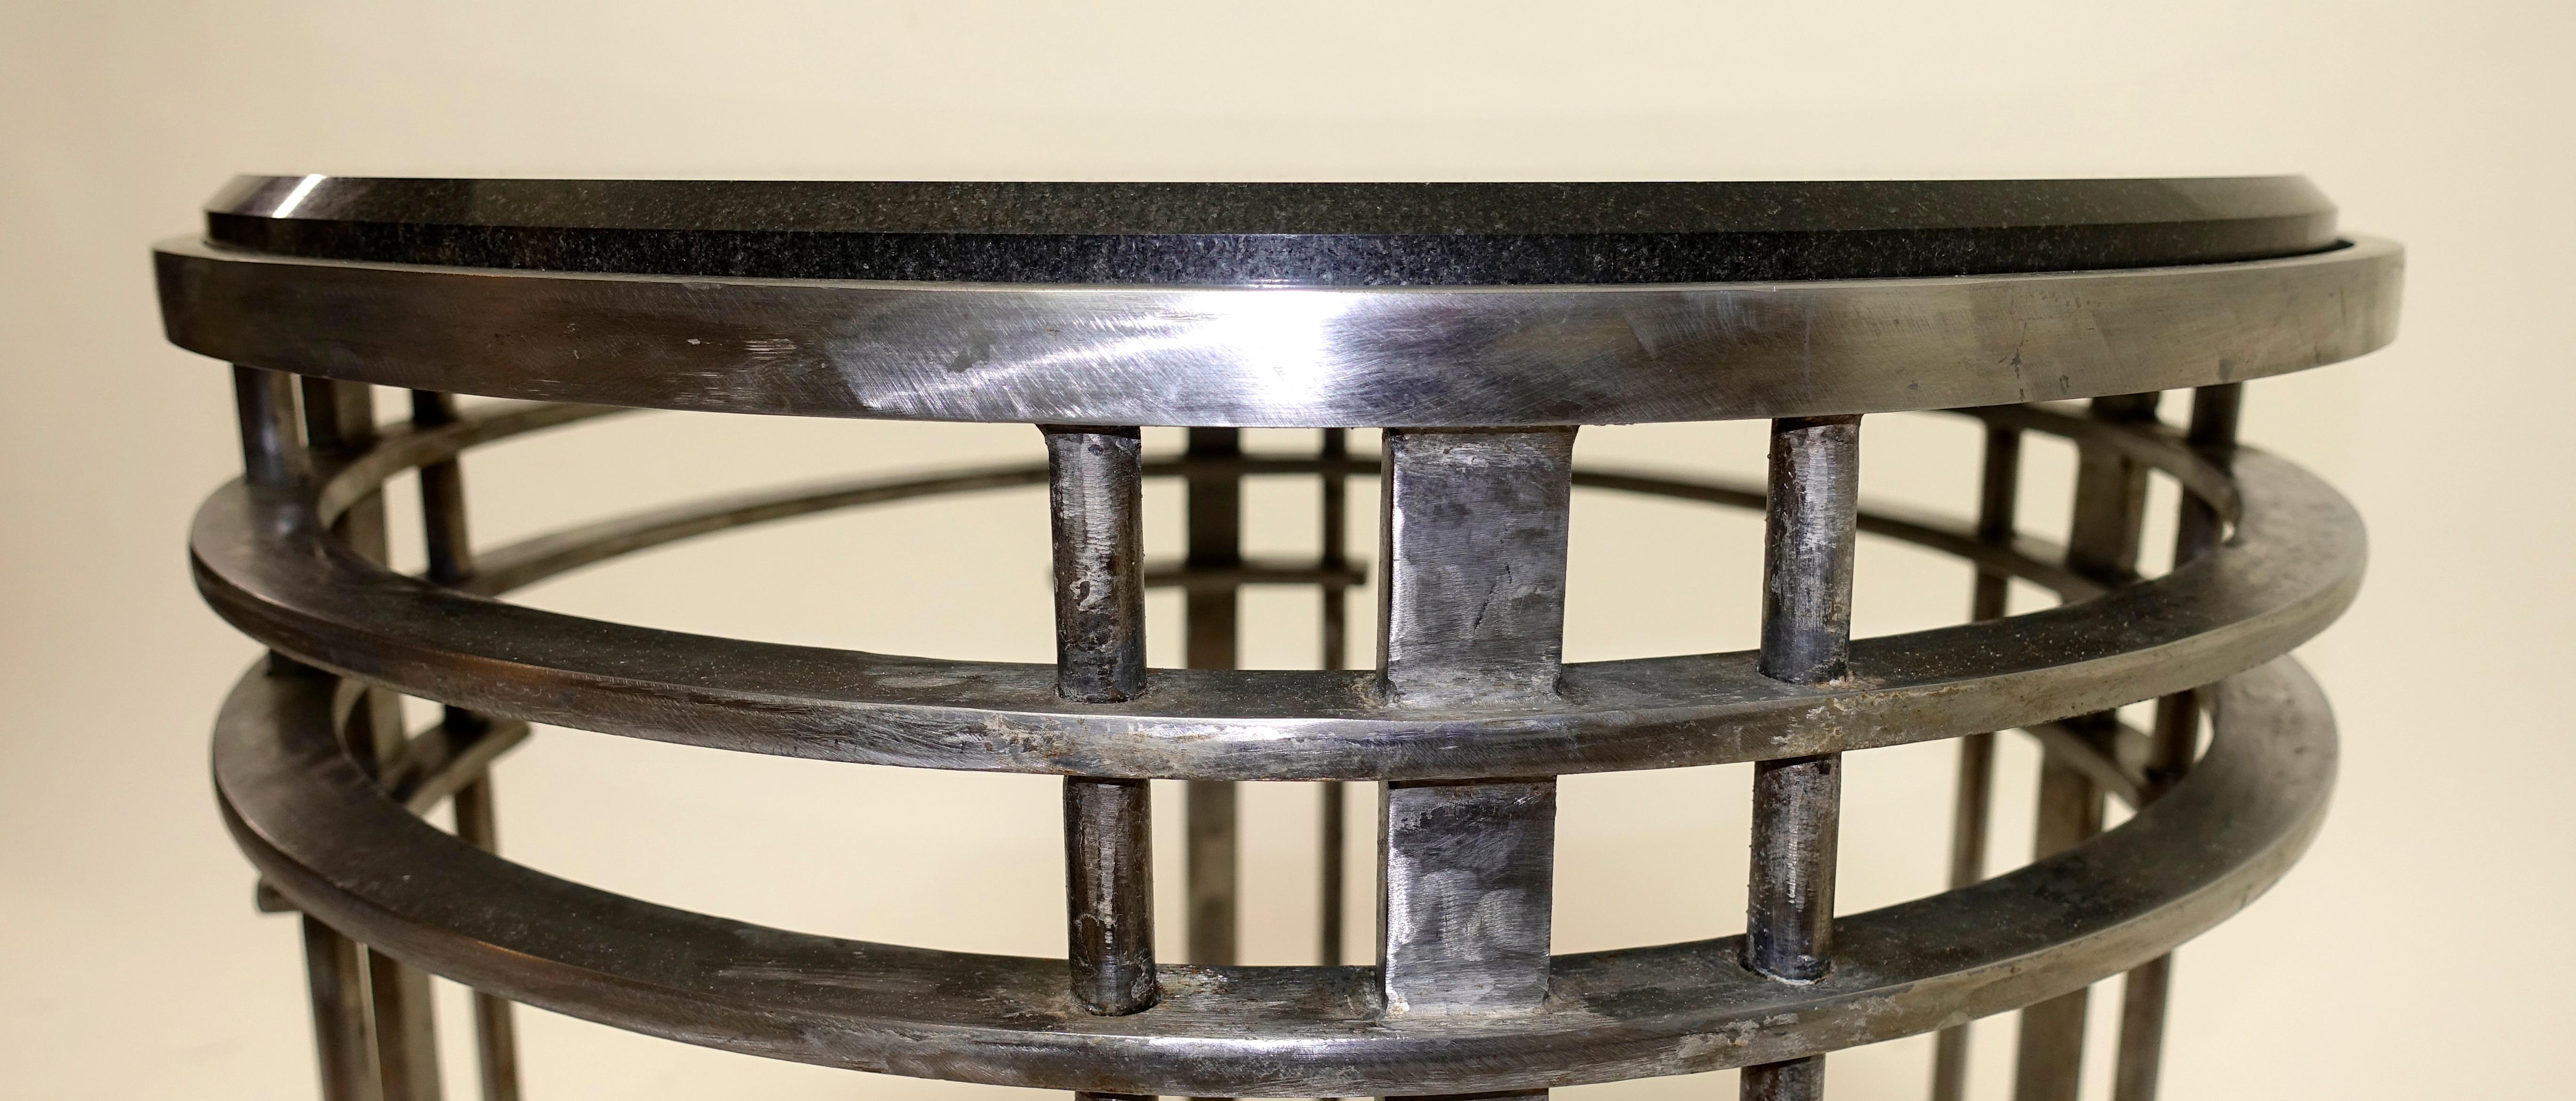 Black beveled granite stone top on a round brushed steel four ring base side or occasional table. 
American 
Mid-20th century.